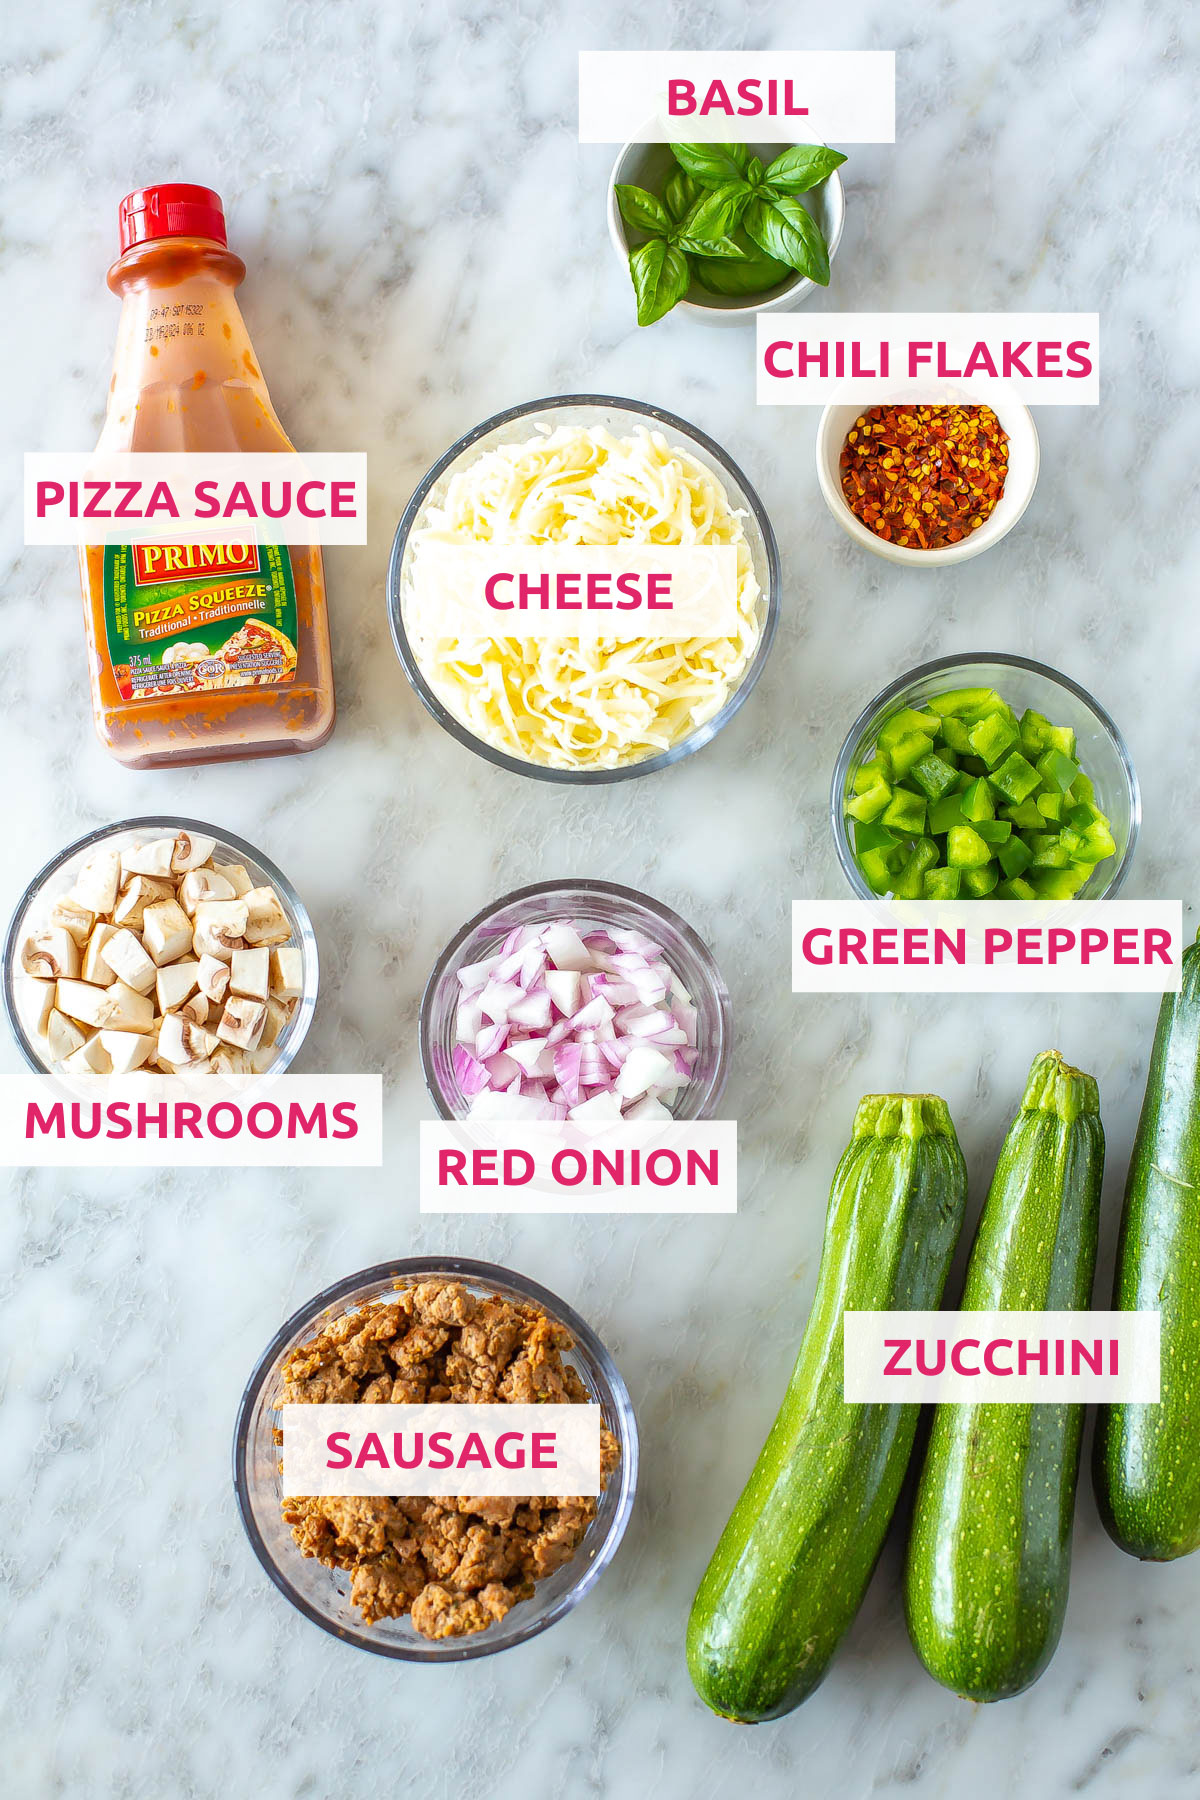 Ingredients for zucchini pizza boats: zucchini, pizza sauce, cheese, green peppers, mushrooms, red onion, sausage, basil and red chili flakes.